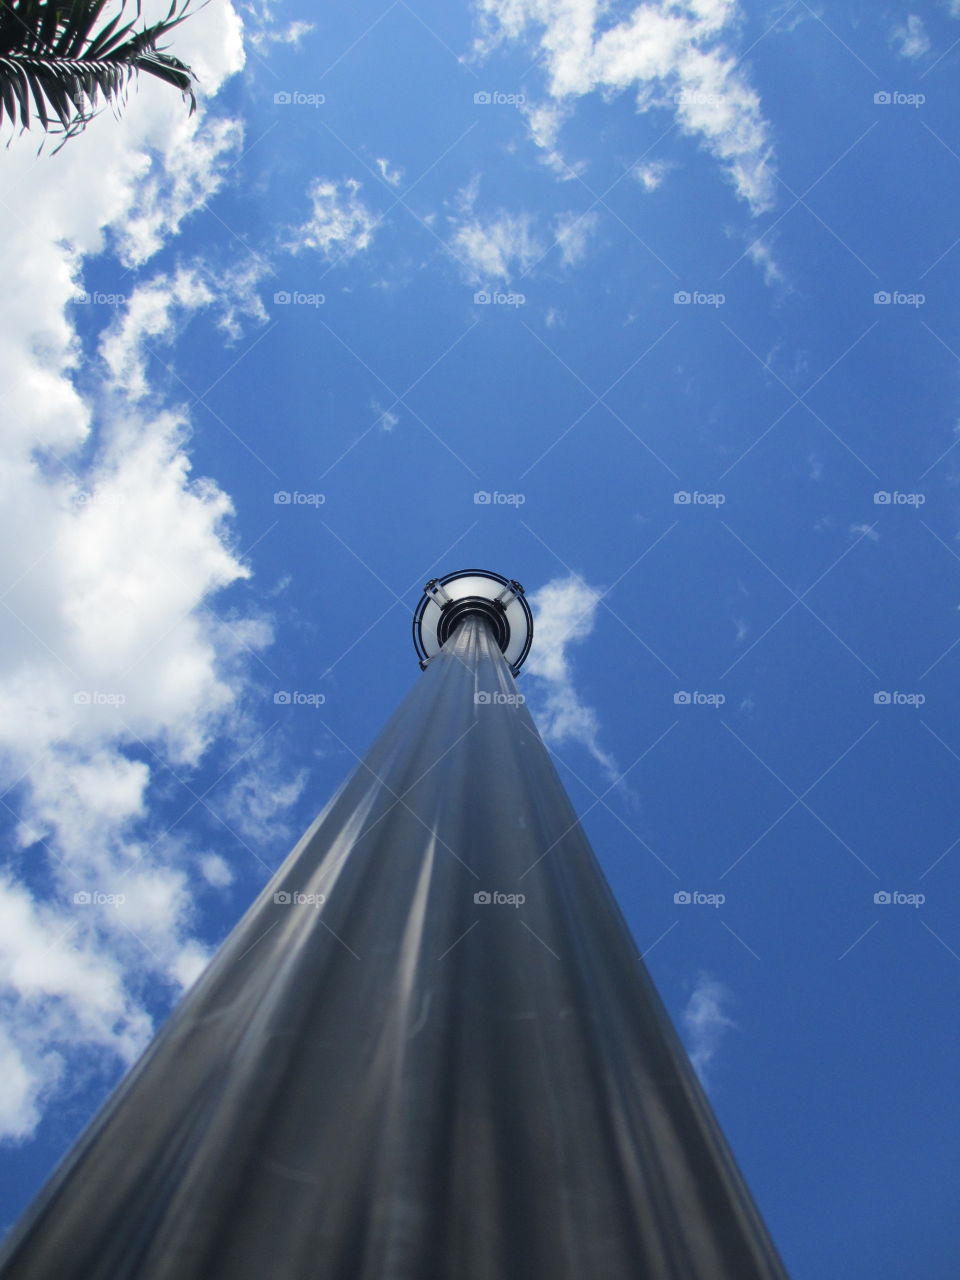 Lamp post against blue sky and clouds